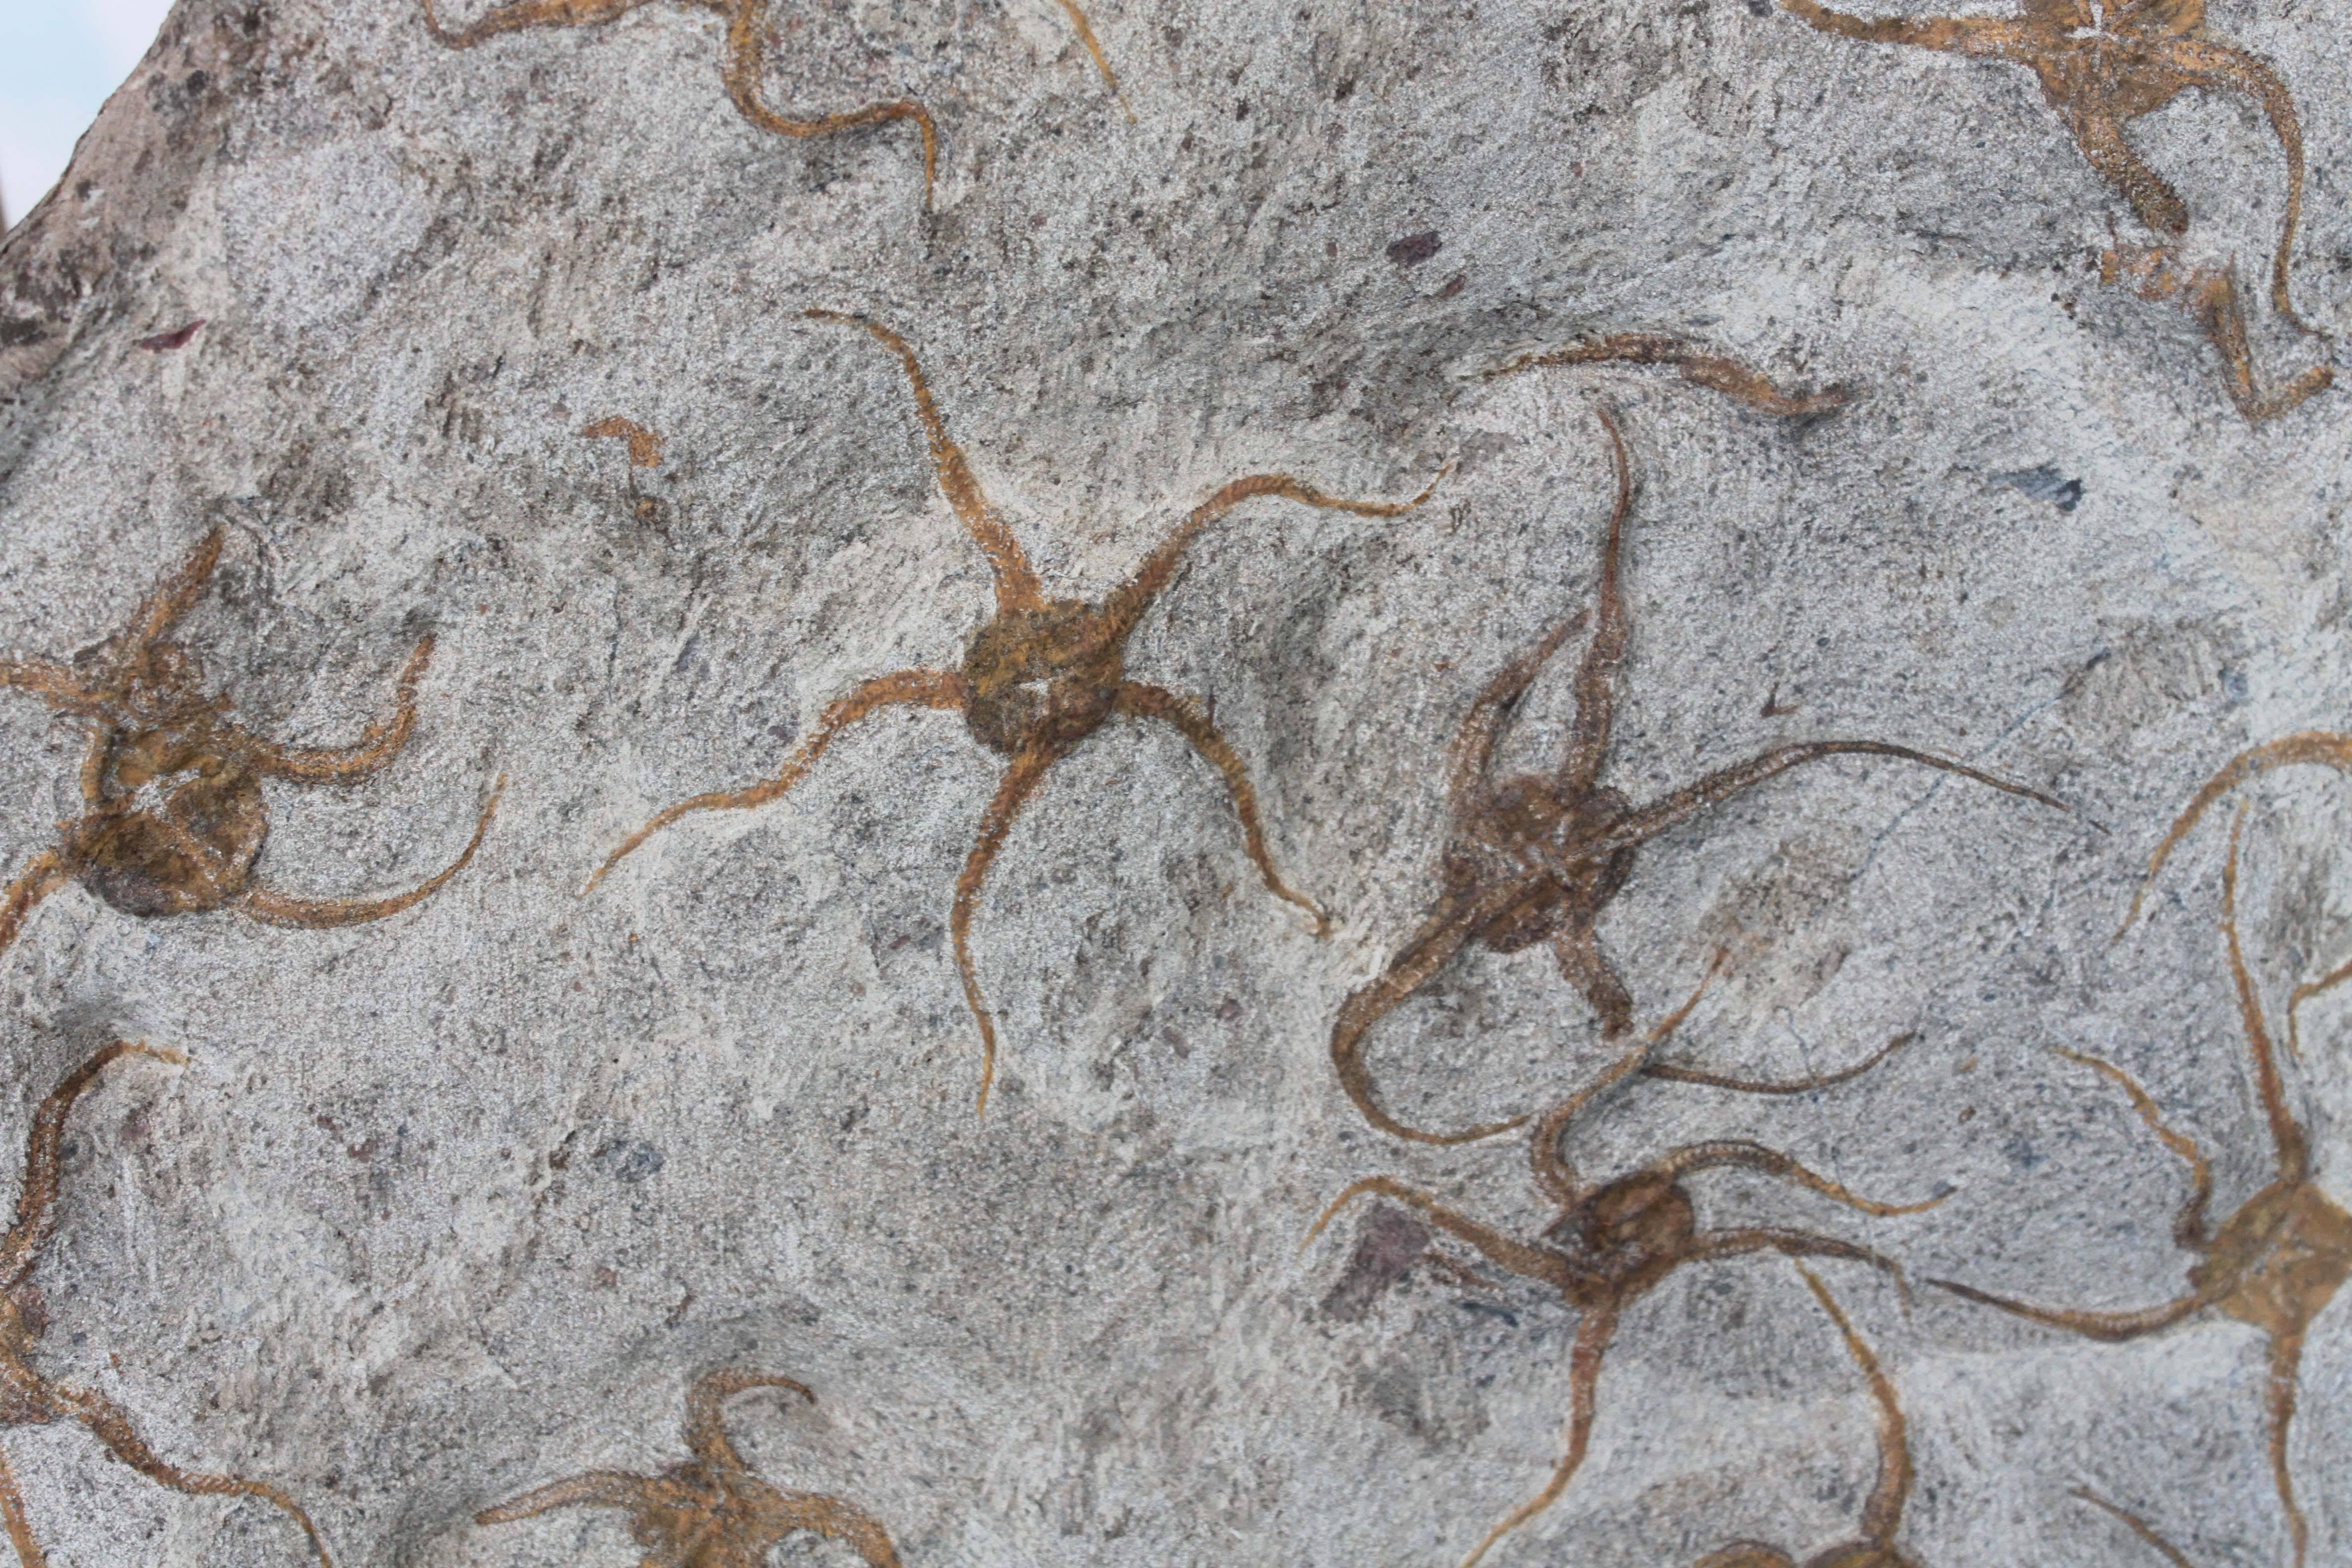 A Ordovician Brittle Star fossil from Morocco with over 21 preserved fossils. Incredible preservation and condition.